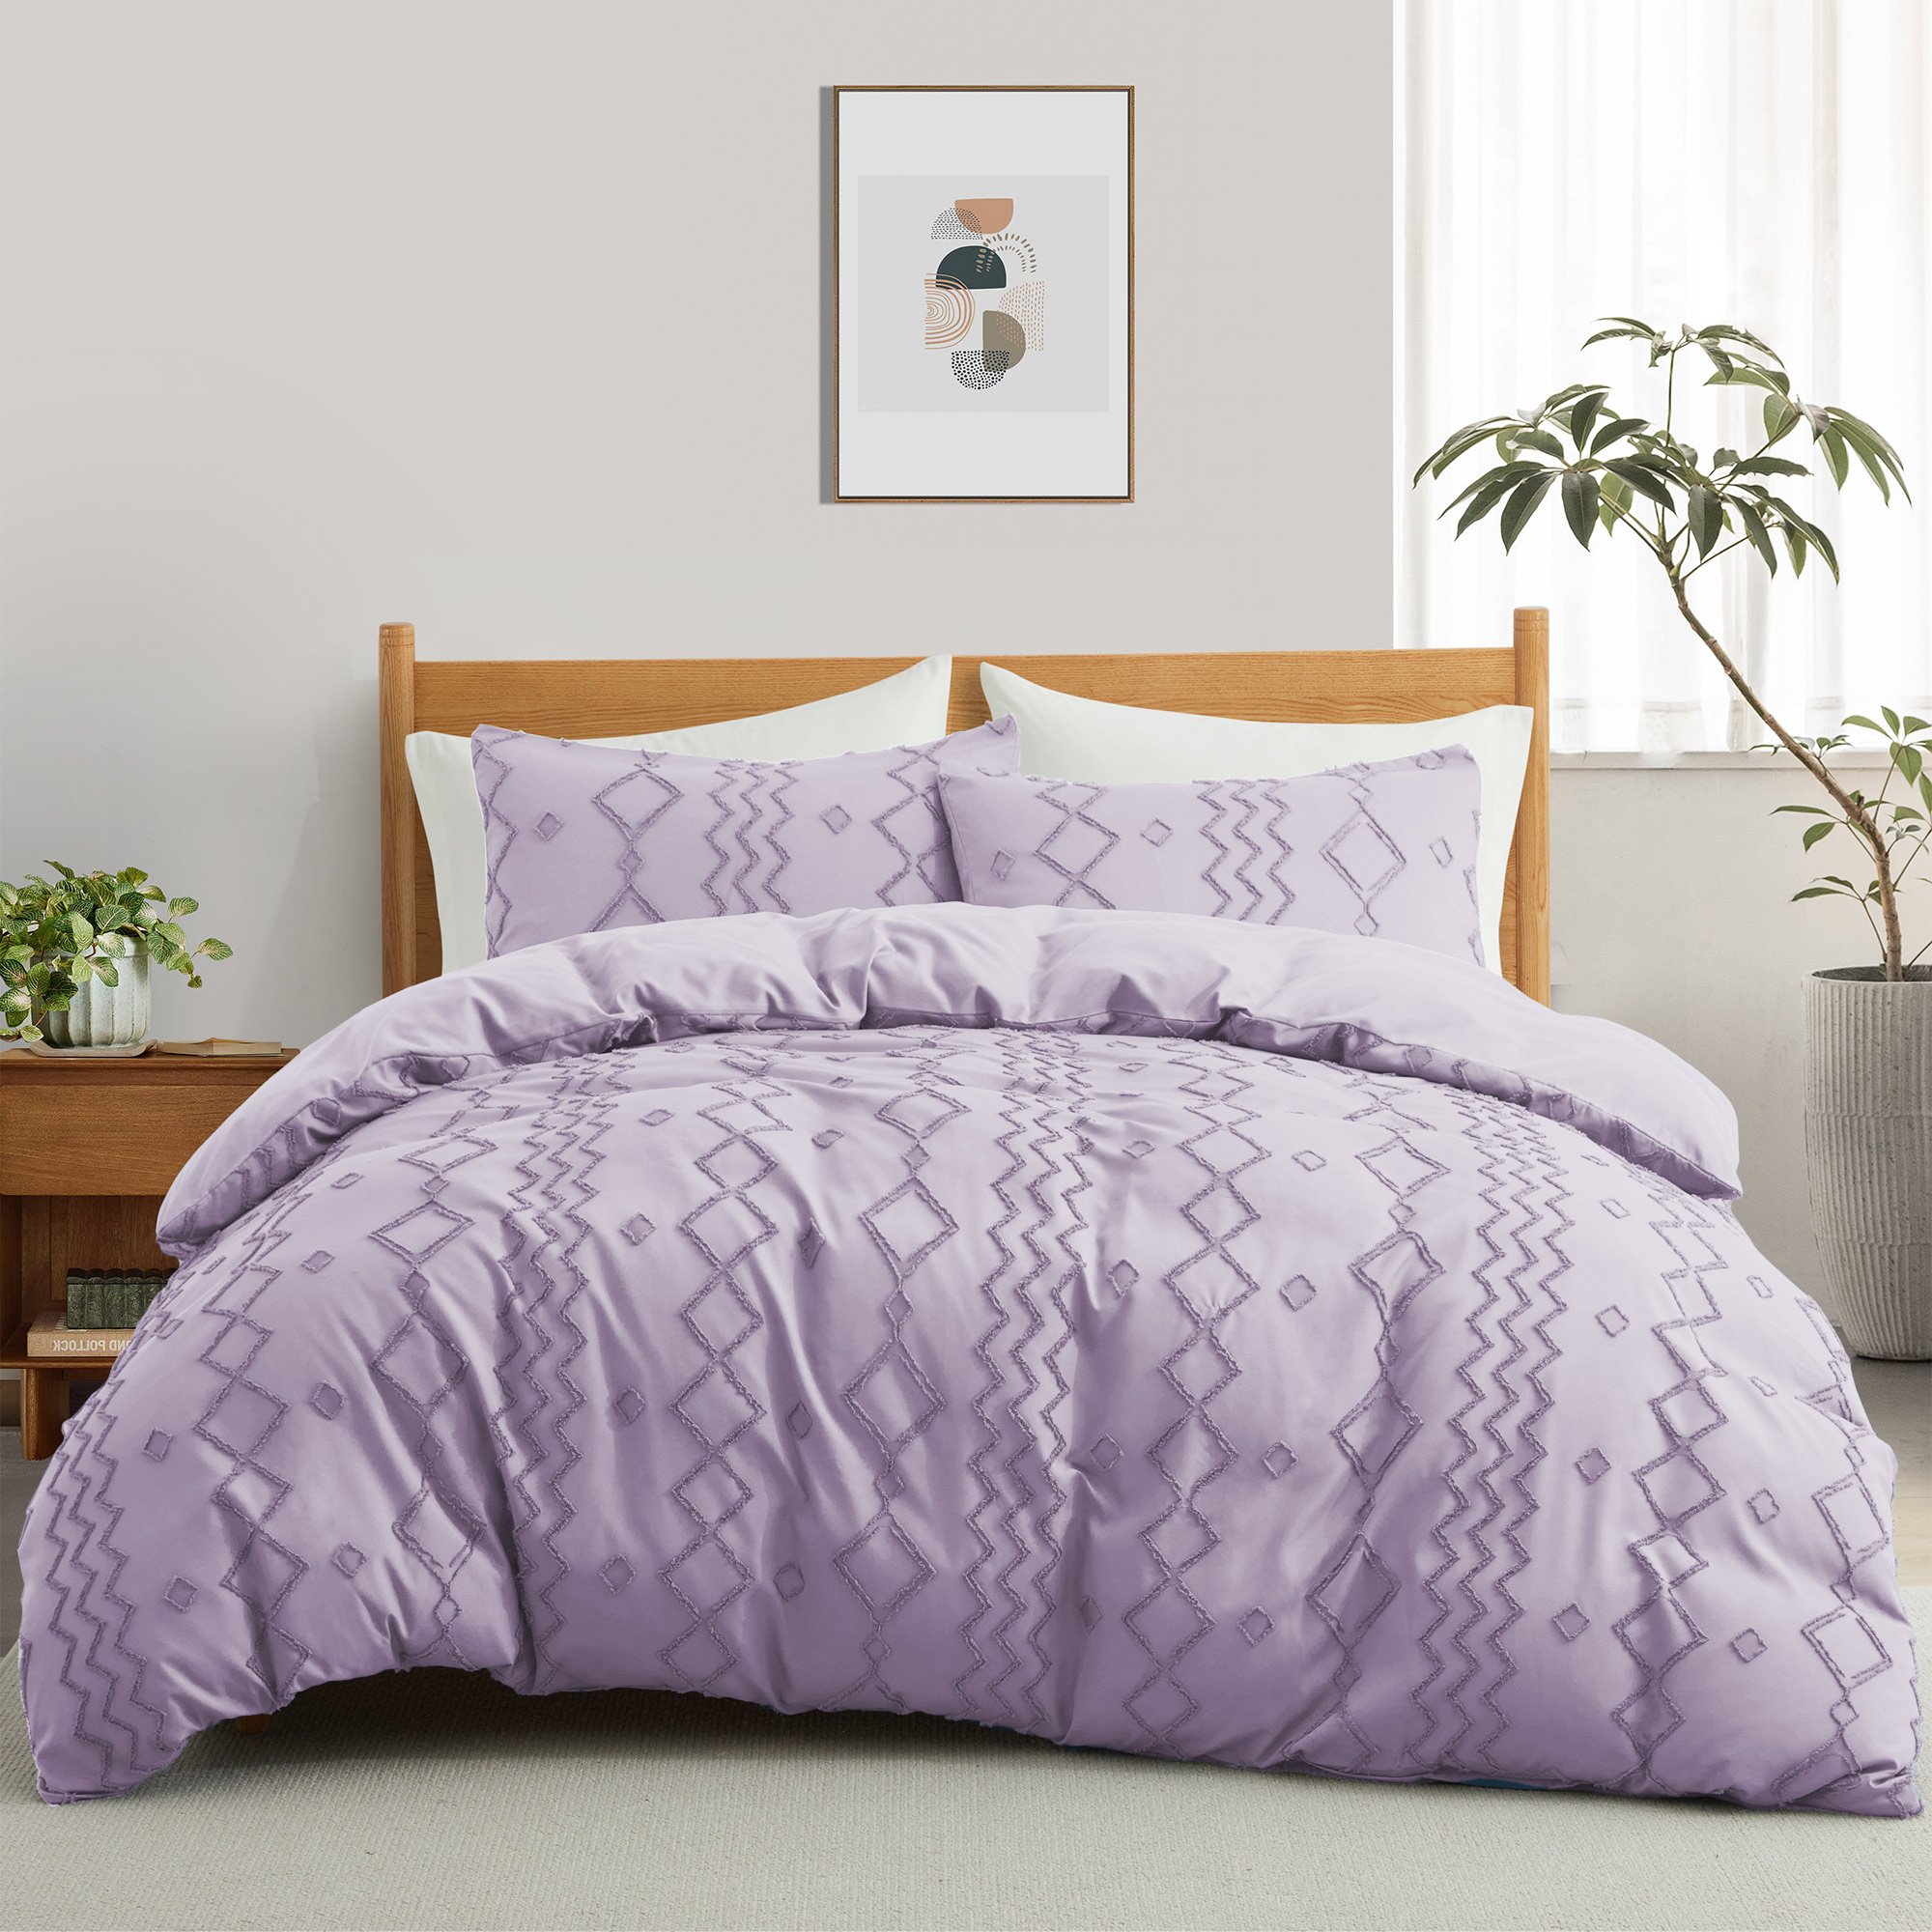 Basic Bedding Sets With All Season Goose Down Feather Comforter, 2 Pack Goose Down Pillows, Duvet Cover Set - Purple Bundles Option, King Si